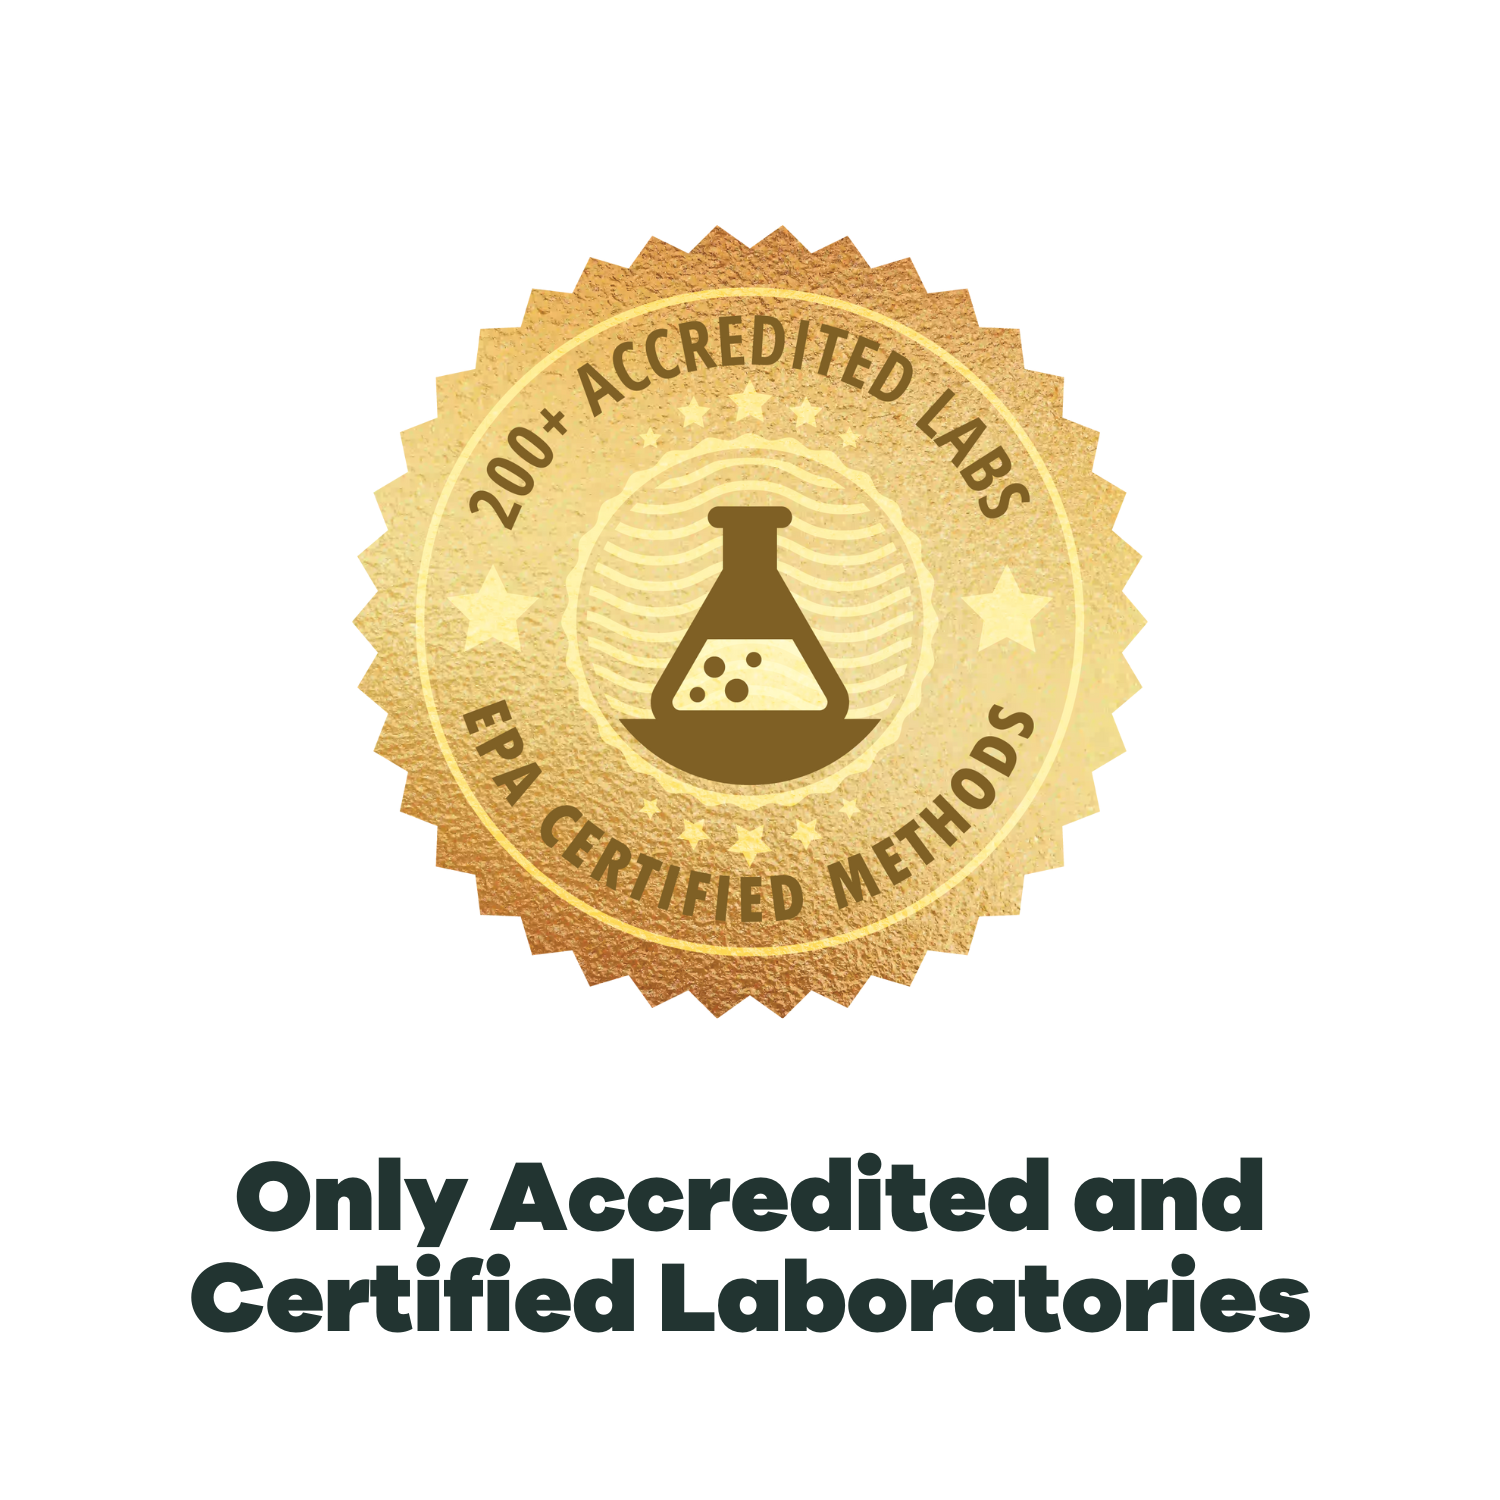 Only accredited and certified labs